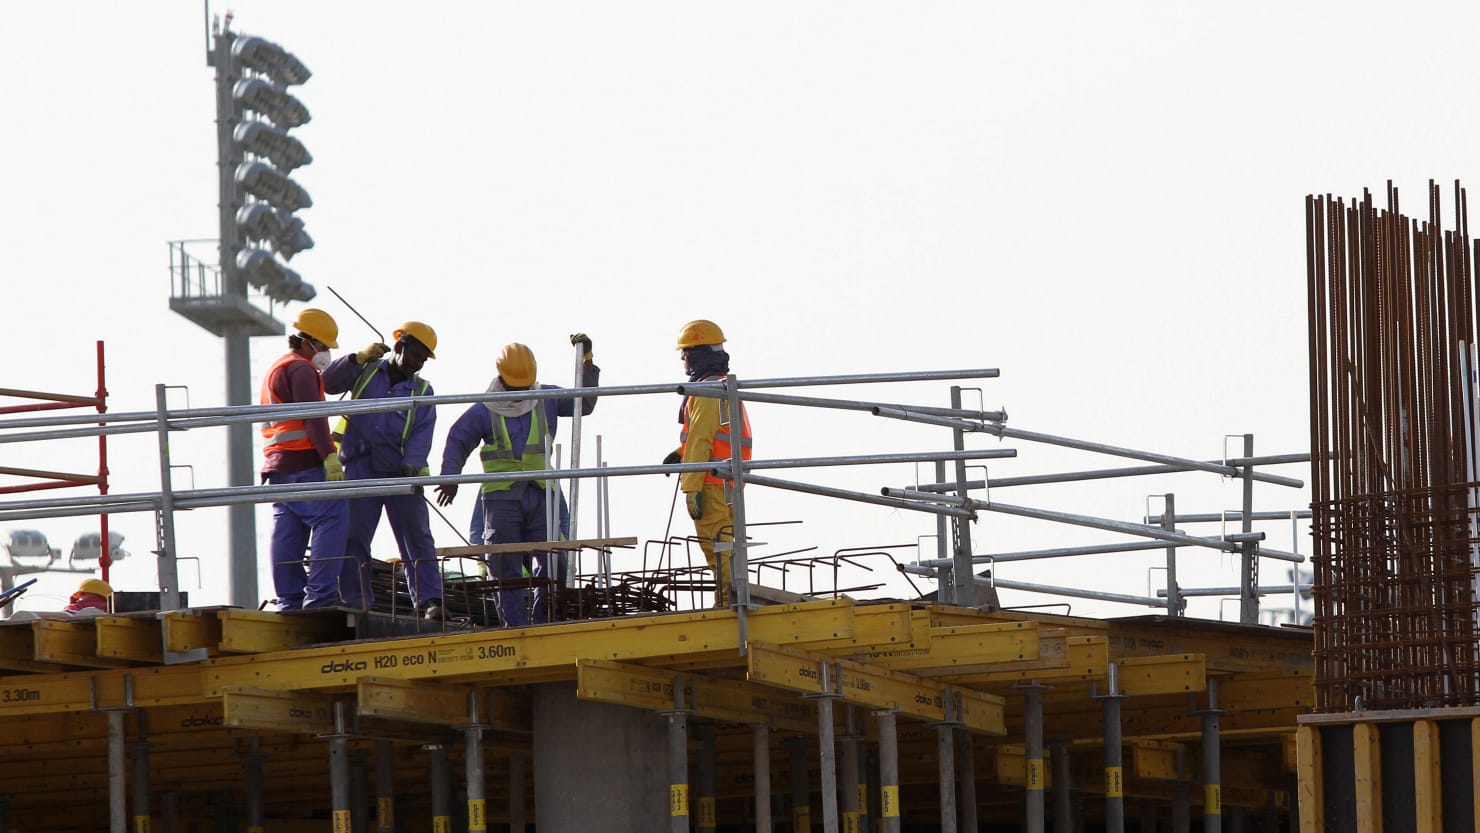 6,500 migrant workers sacrificed for Qatar’s world championship dream, says report